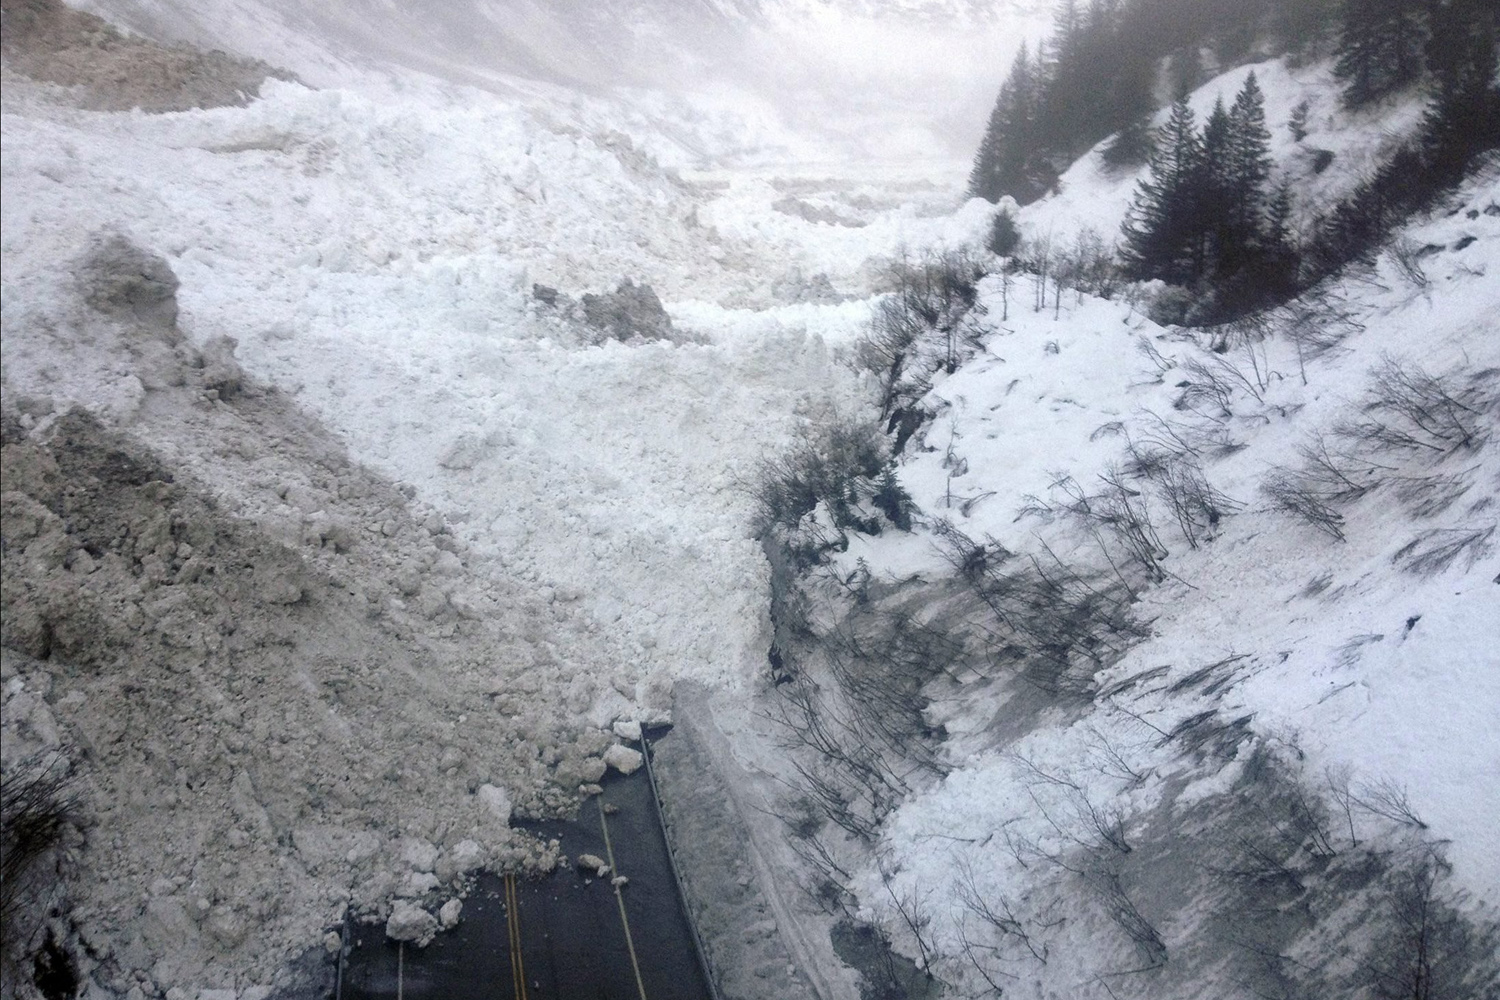 Avalanche debris is pictured on the Richardson Highway in Alaska in this handout photo